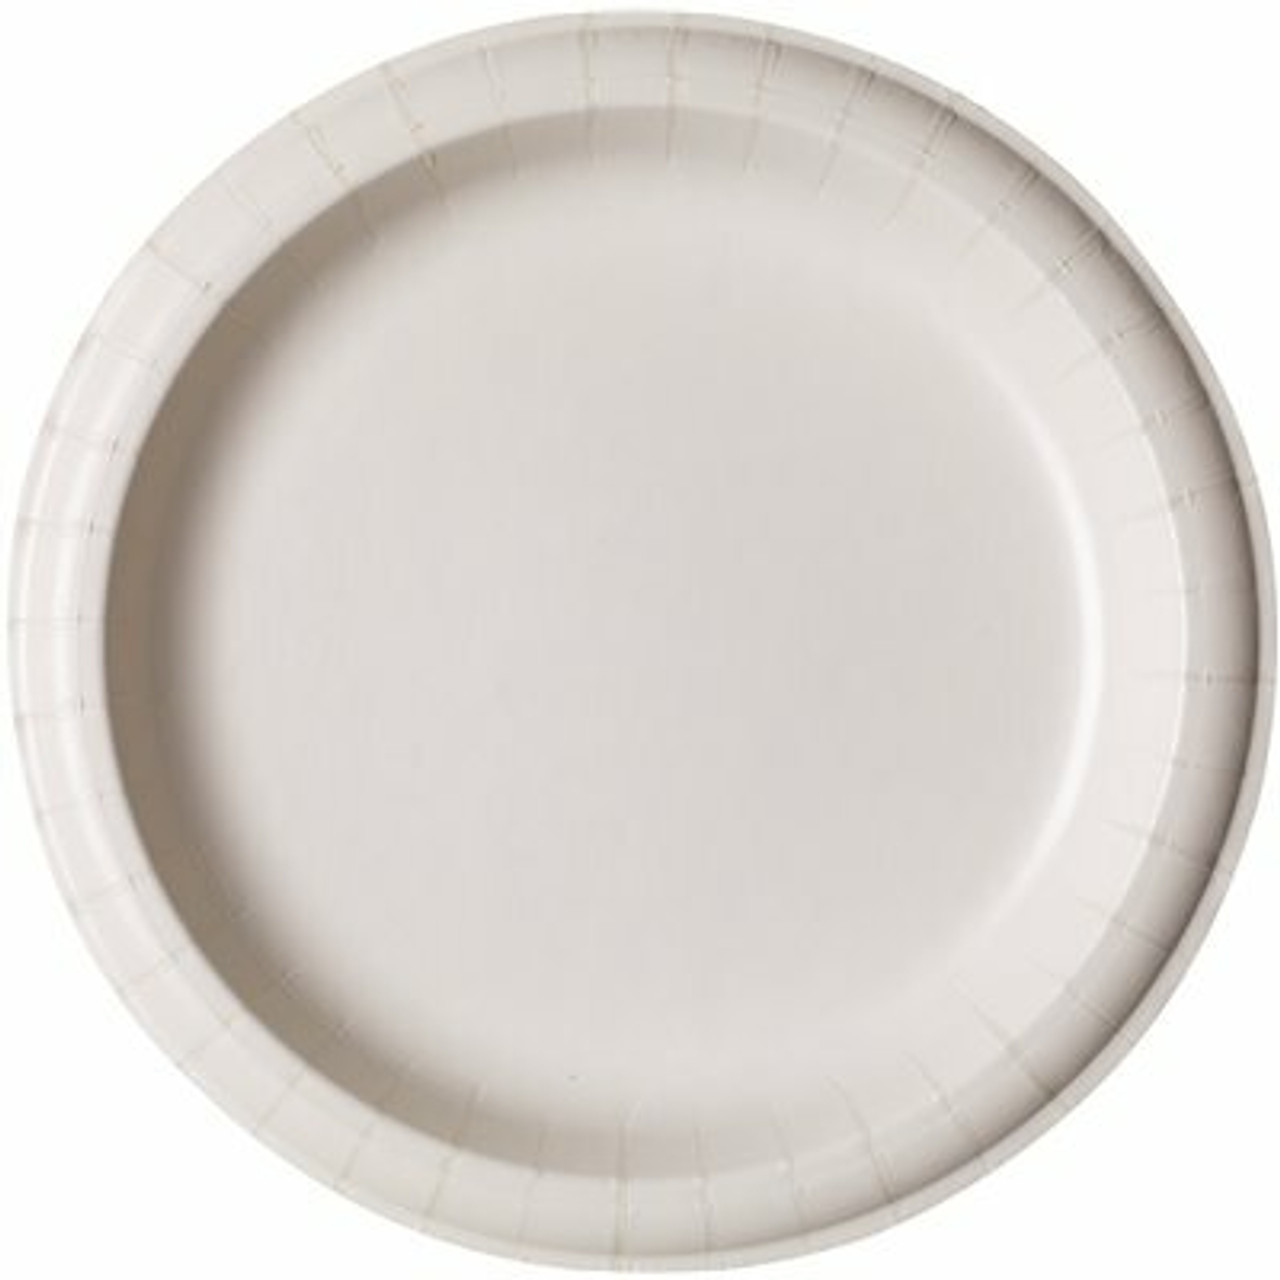 Dixie Ultra 8.5 In. Heavy-Weight Paper Plates, White, Disposable Paper Plates (500 Per Case)